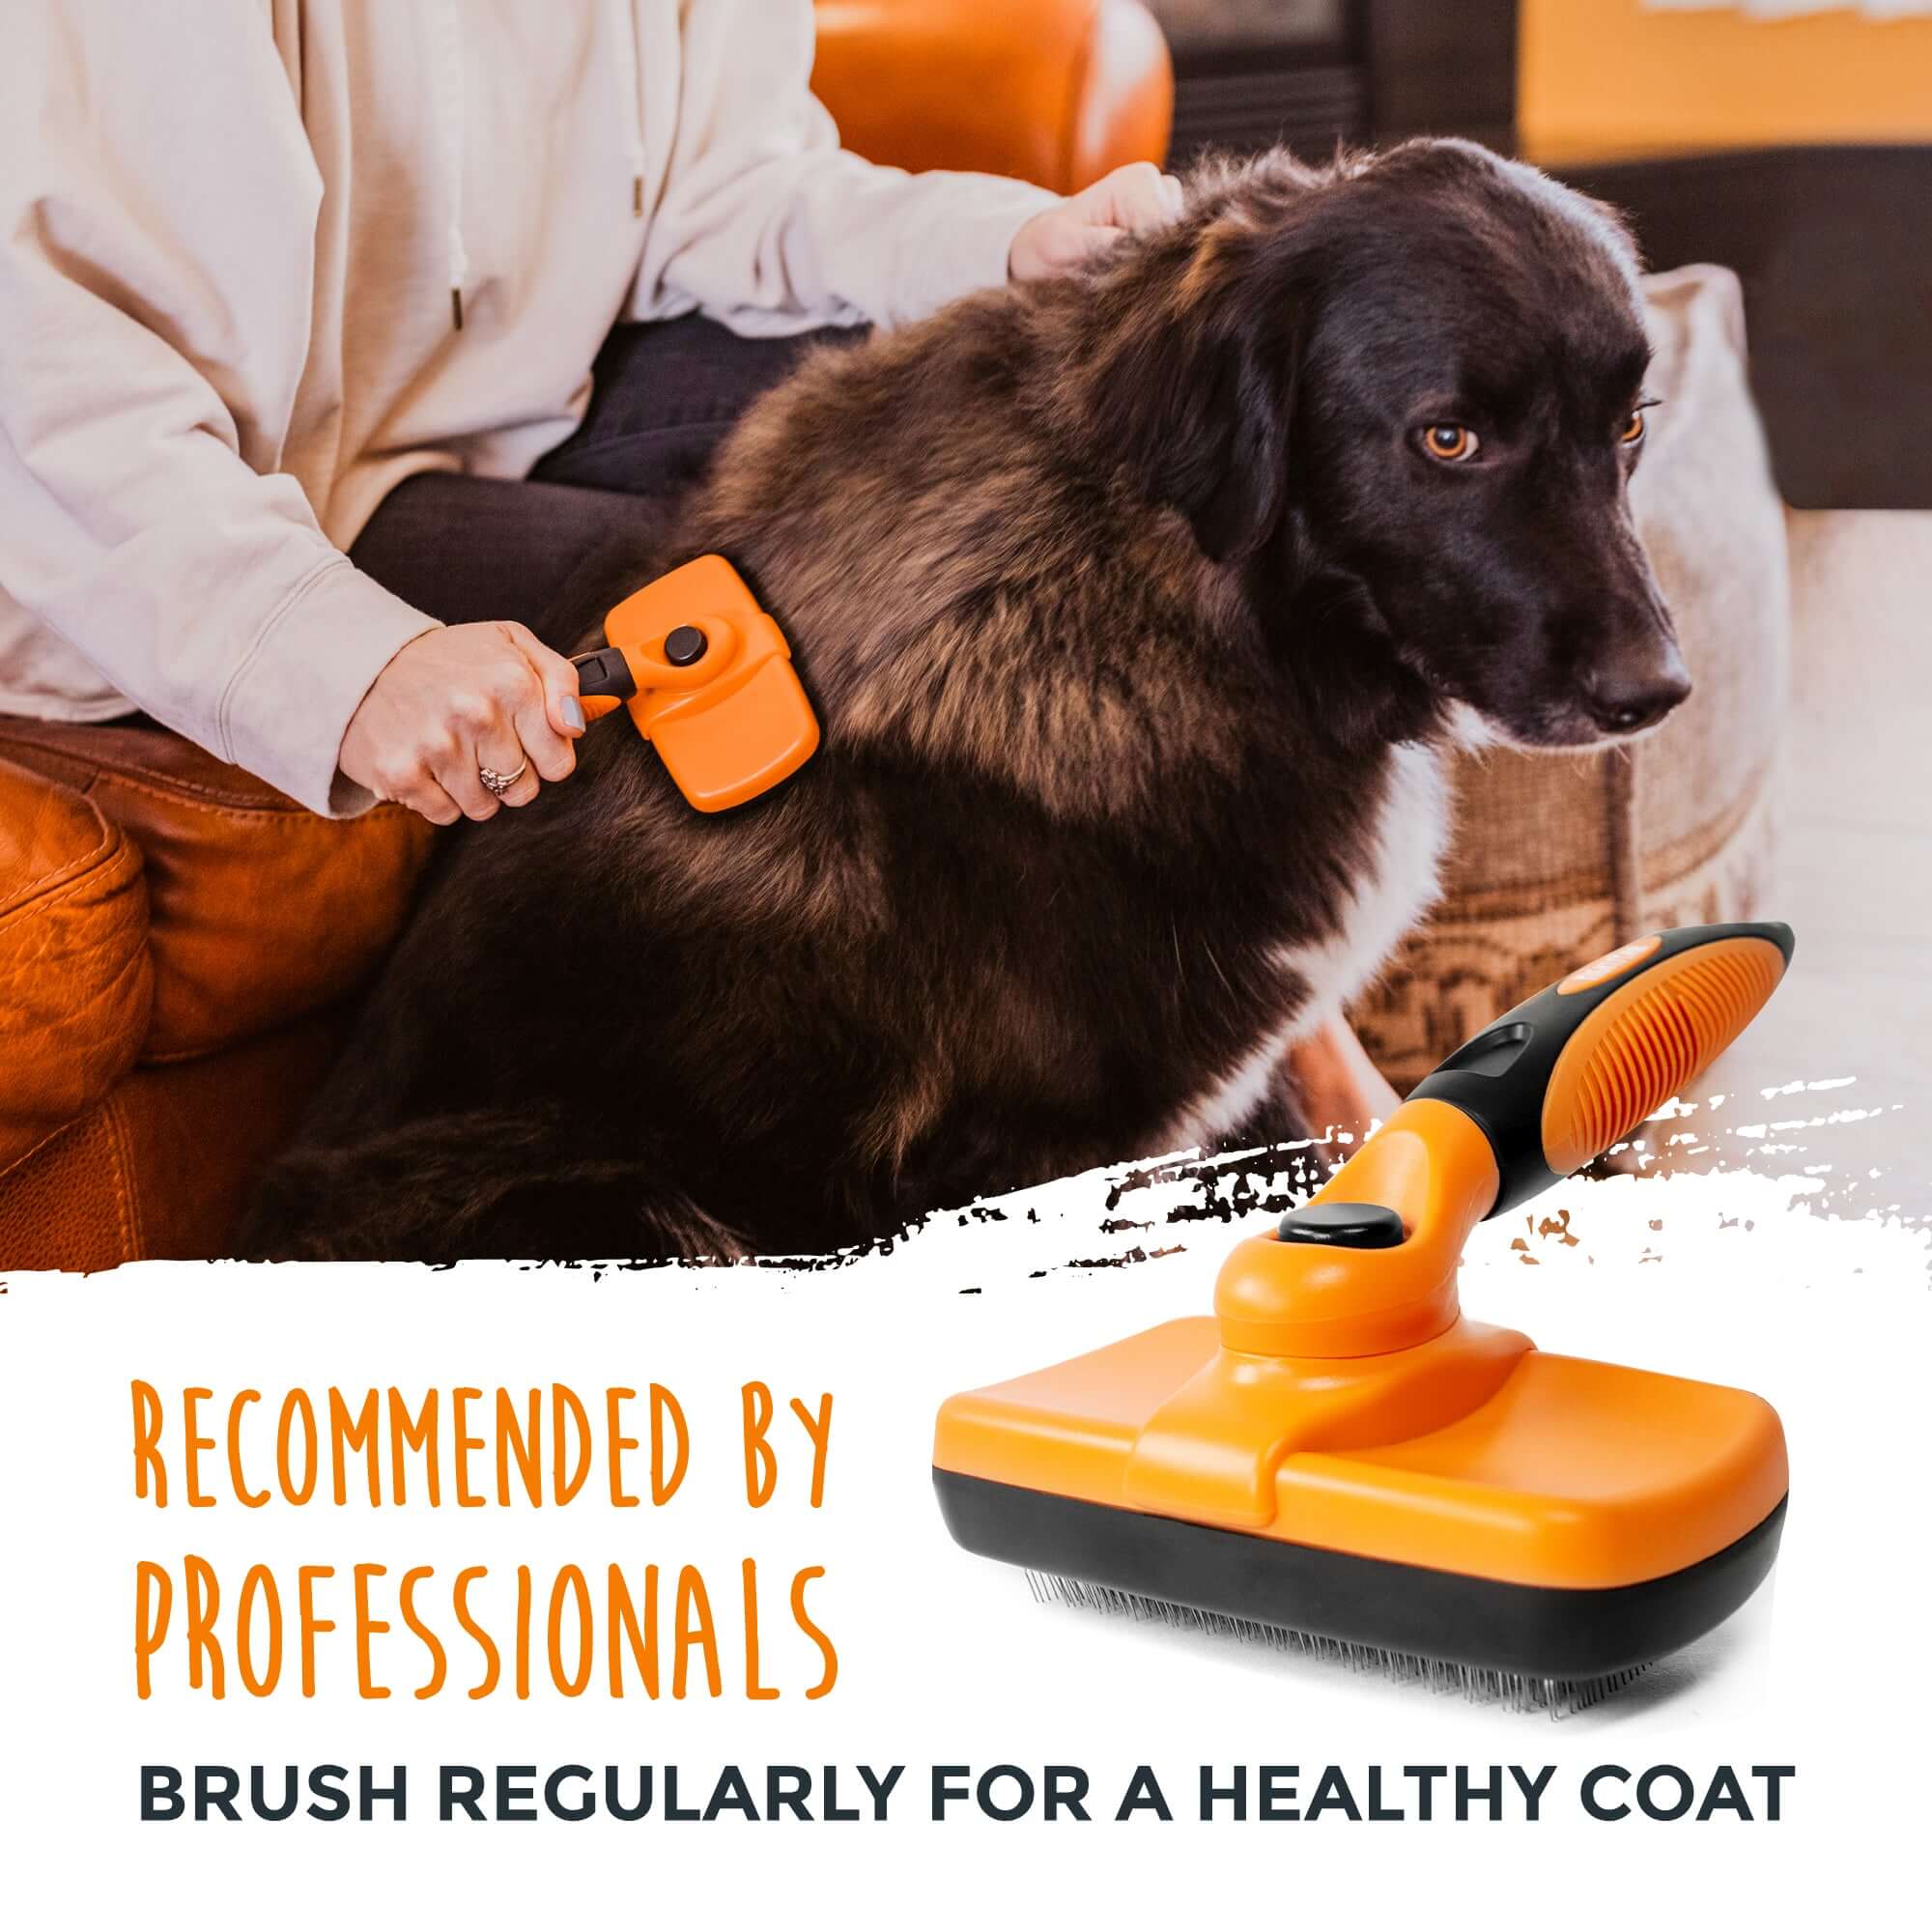 Dog Grooming Brush - Mighty Paw Retractable Slicker Brush with Stainless Steel Bristles